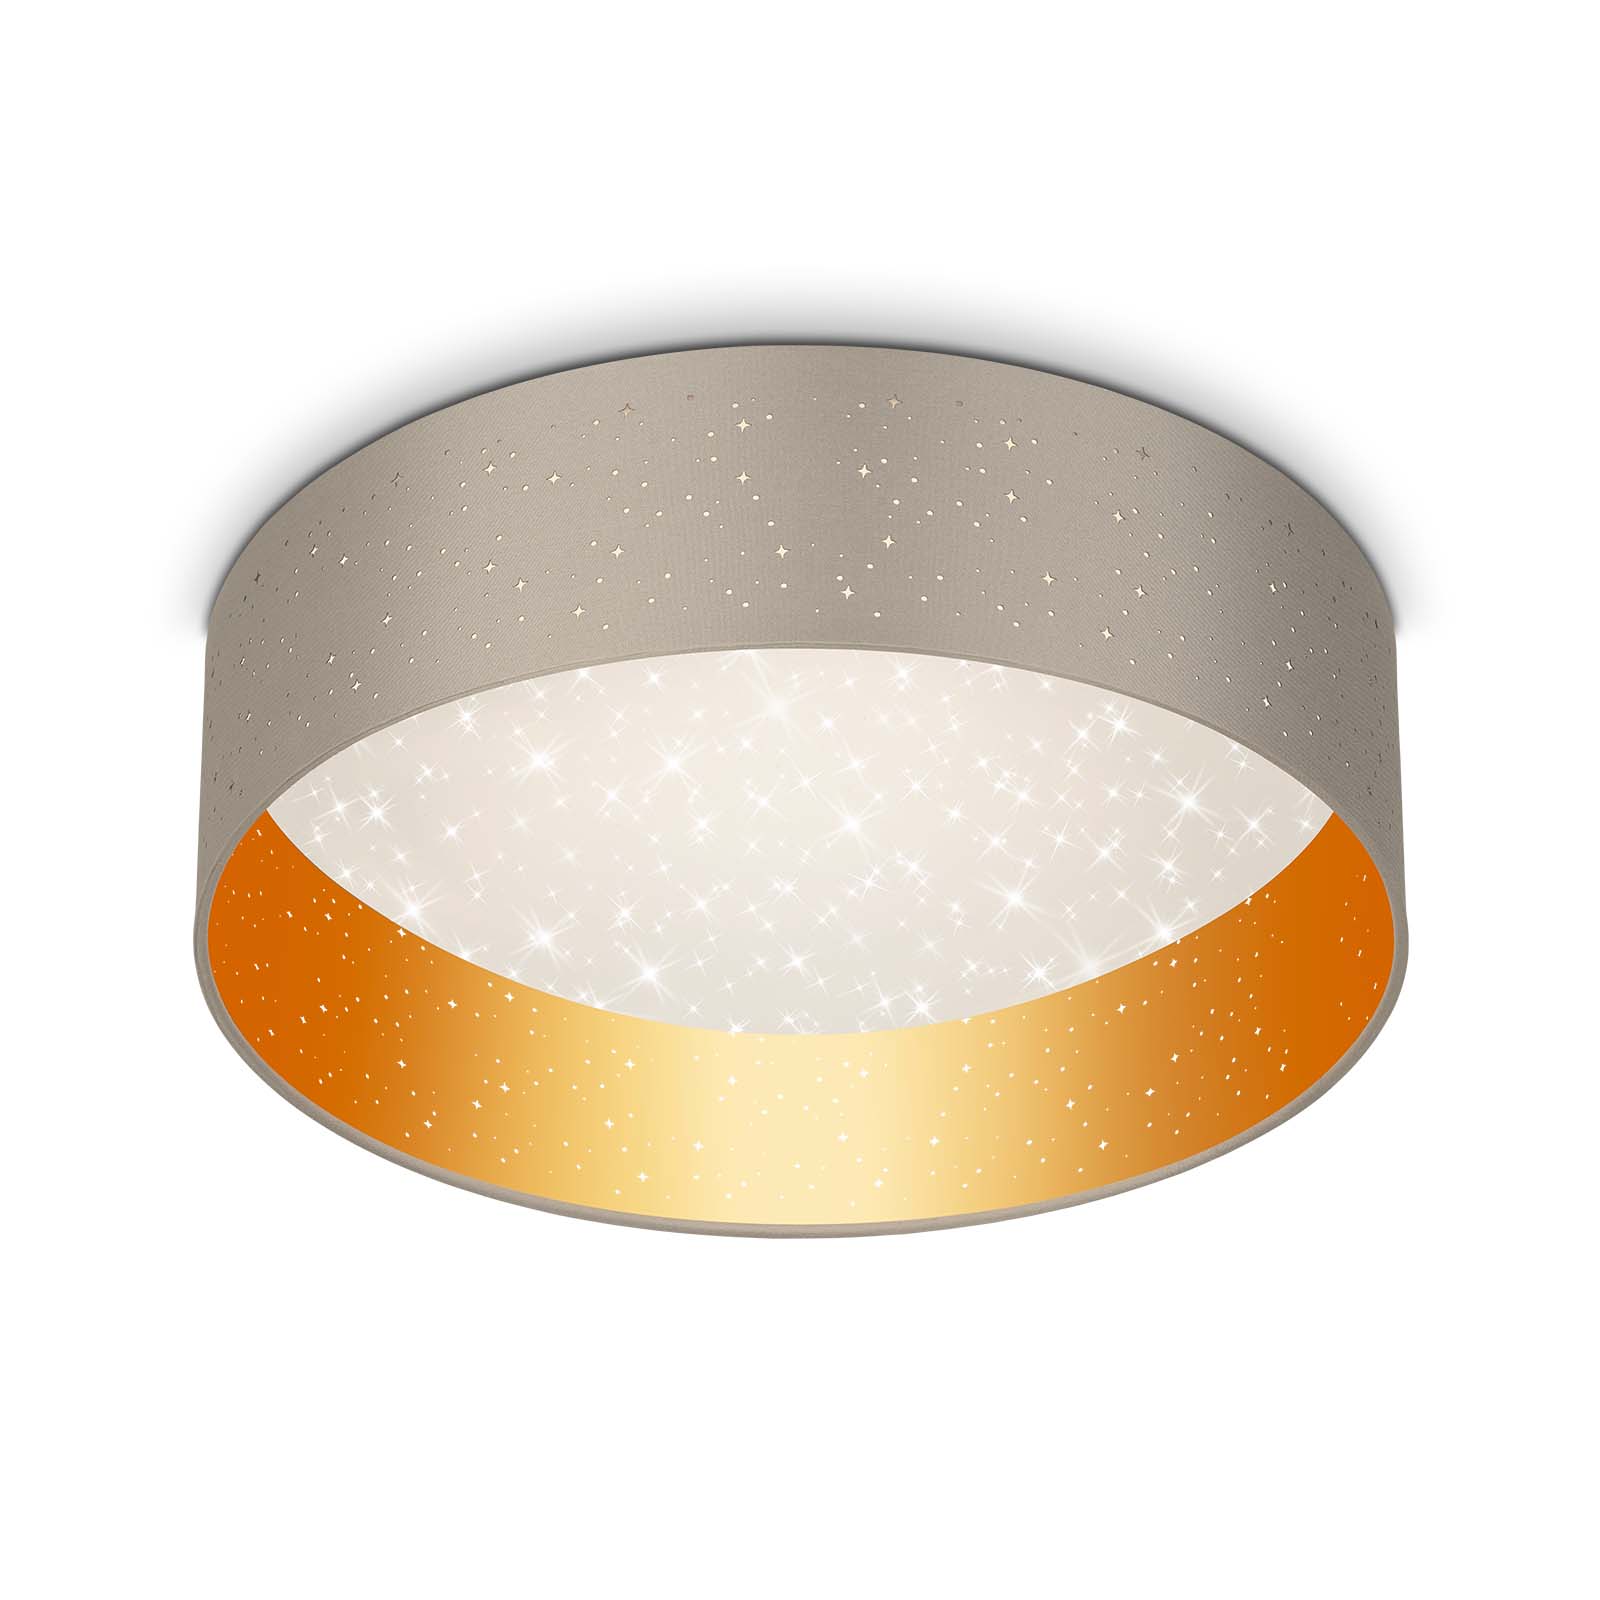 Sternen sky ceiling lamp, Ø 40 cm, 18 W, 2200 lm, taupe gold